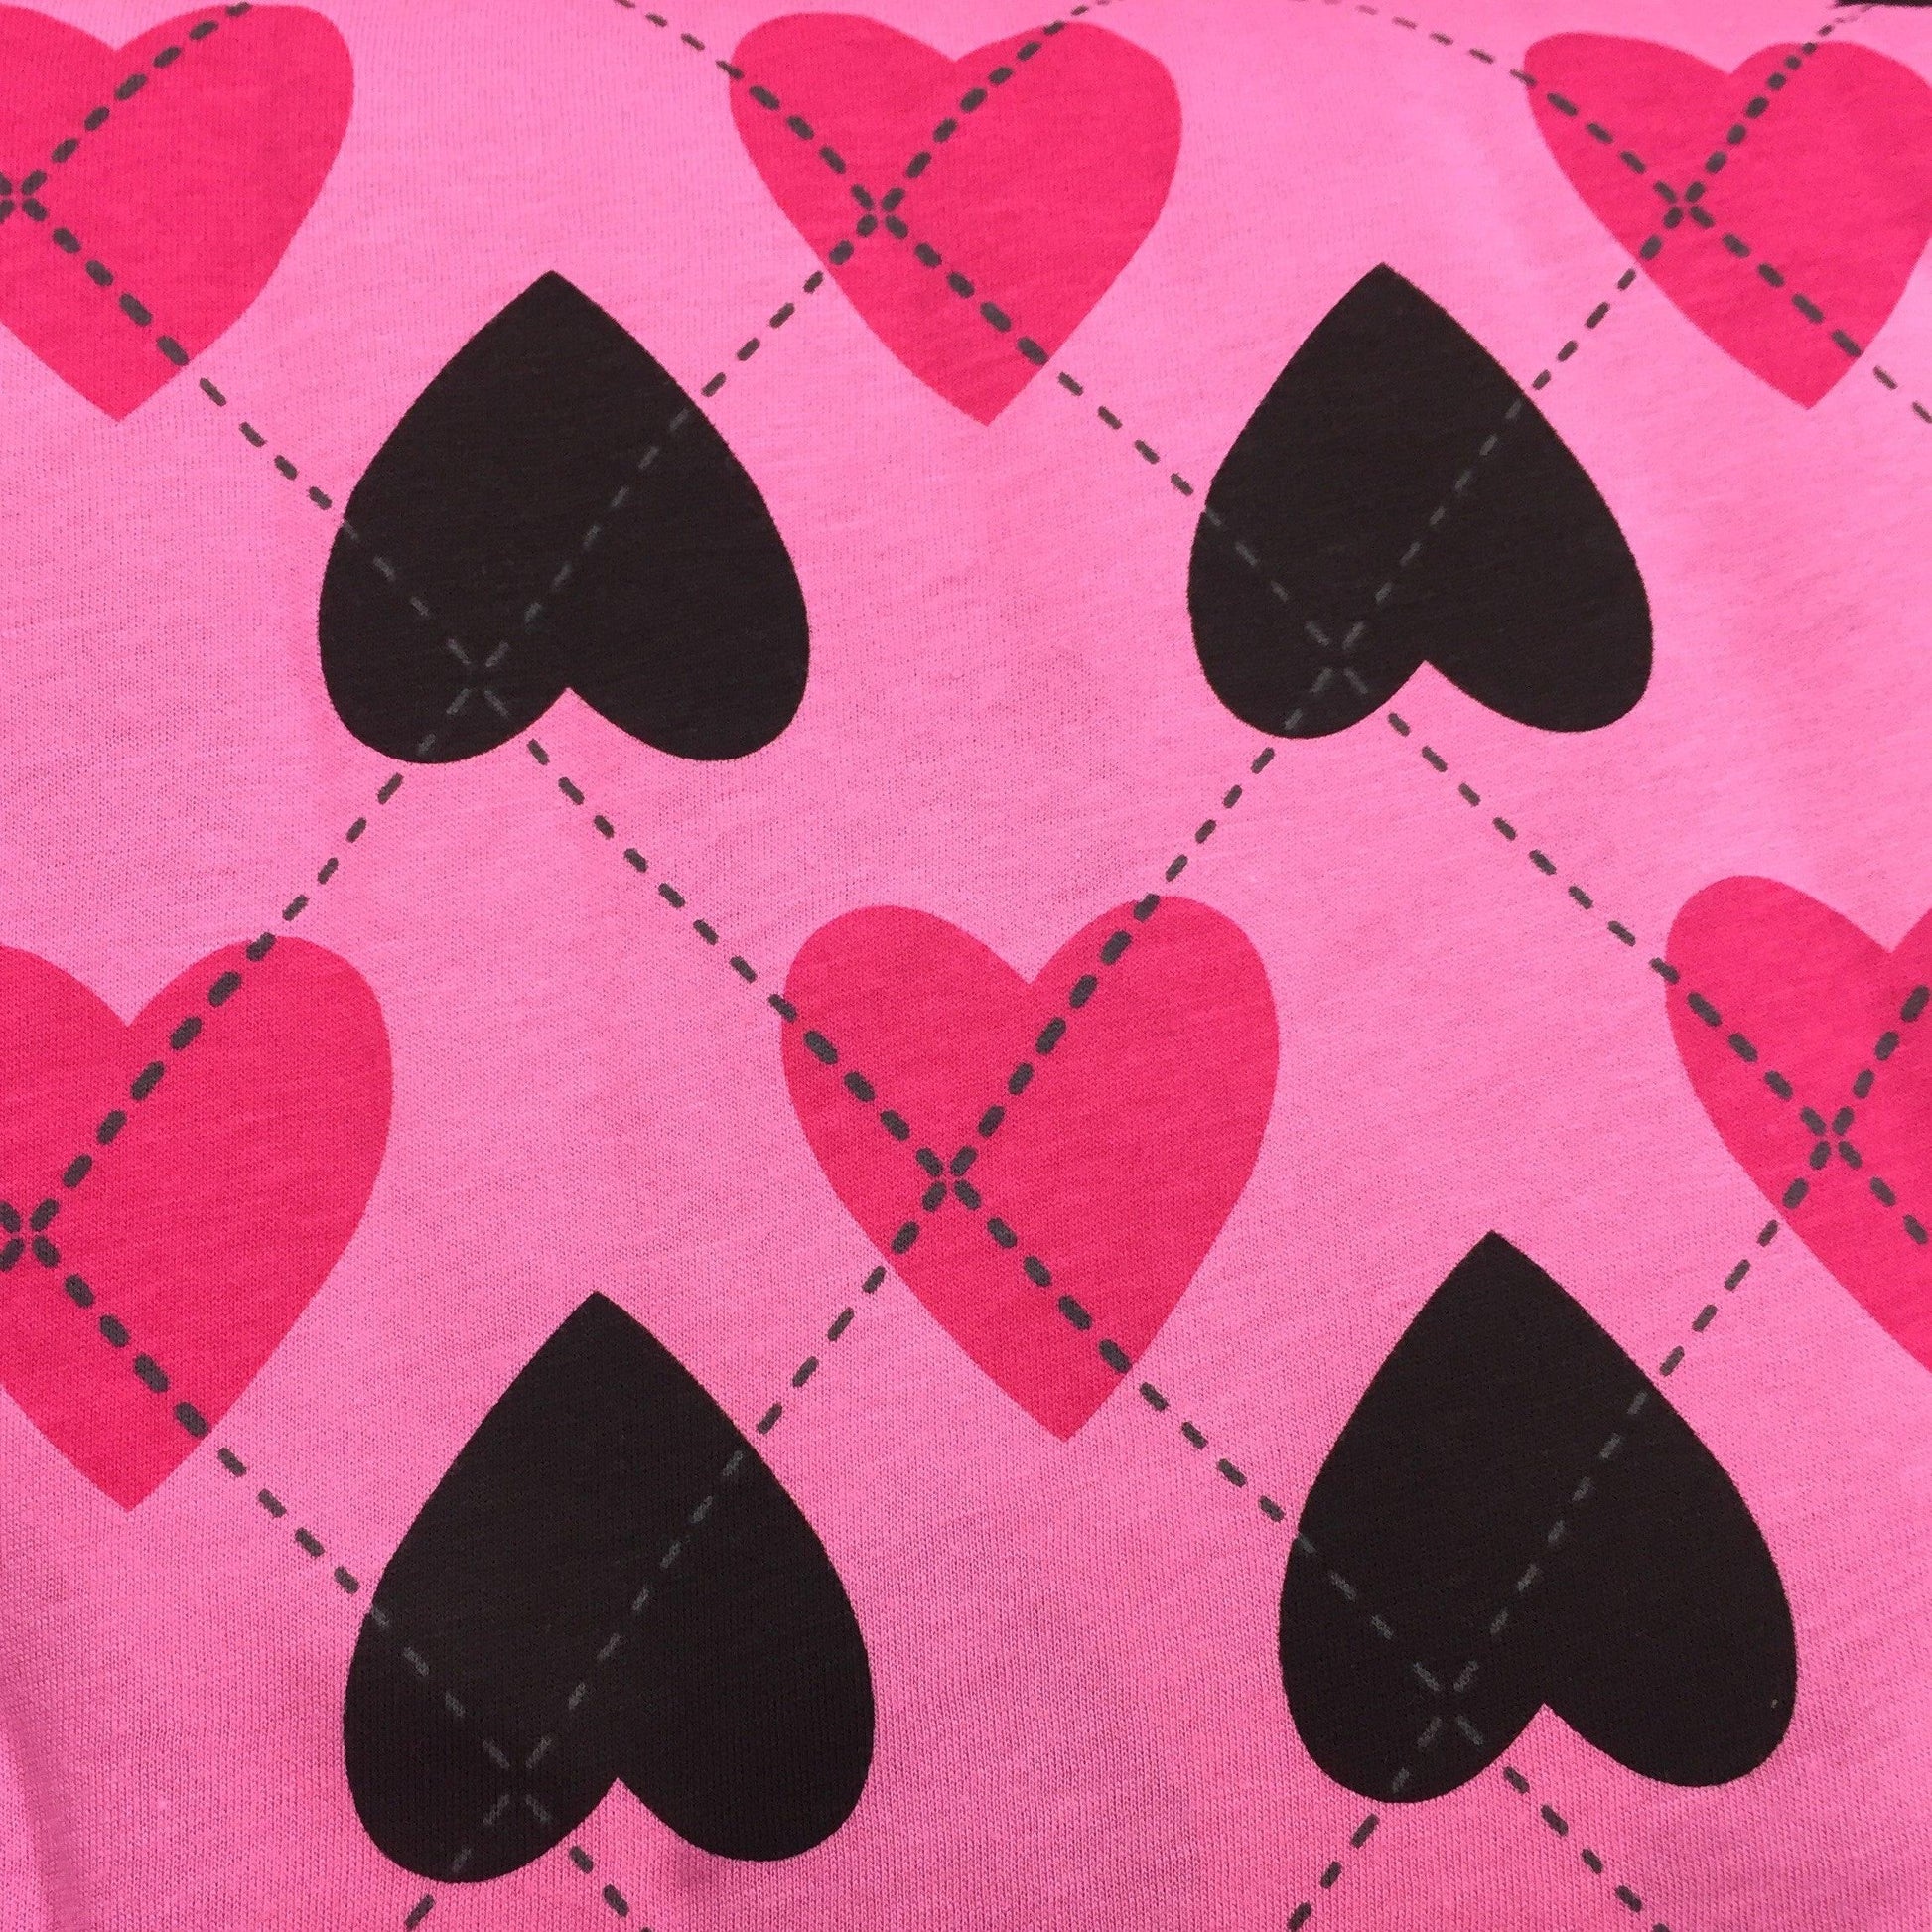 Harlequin Hearts on Pink Cotton Jersey